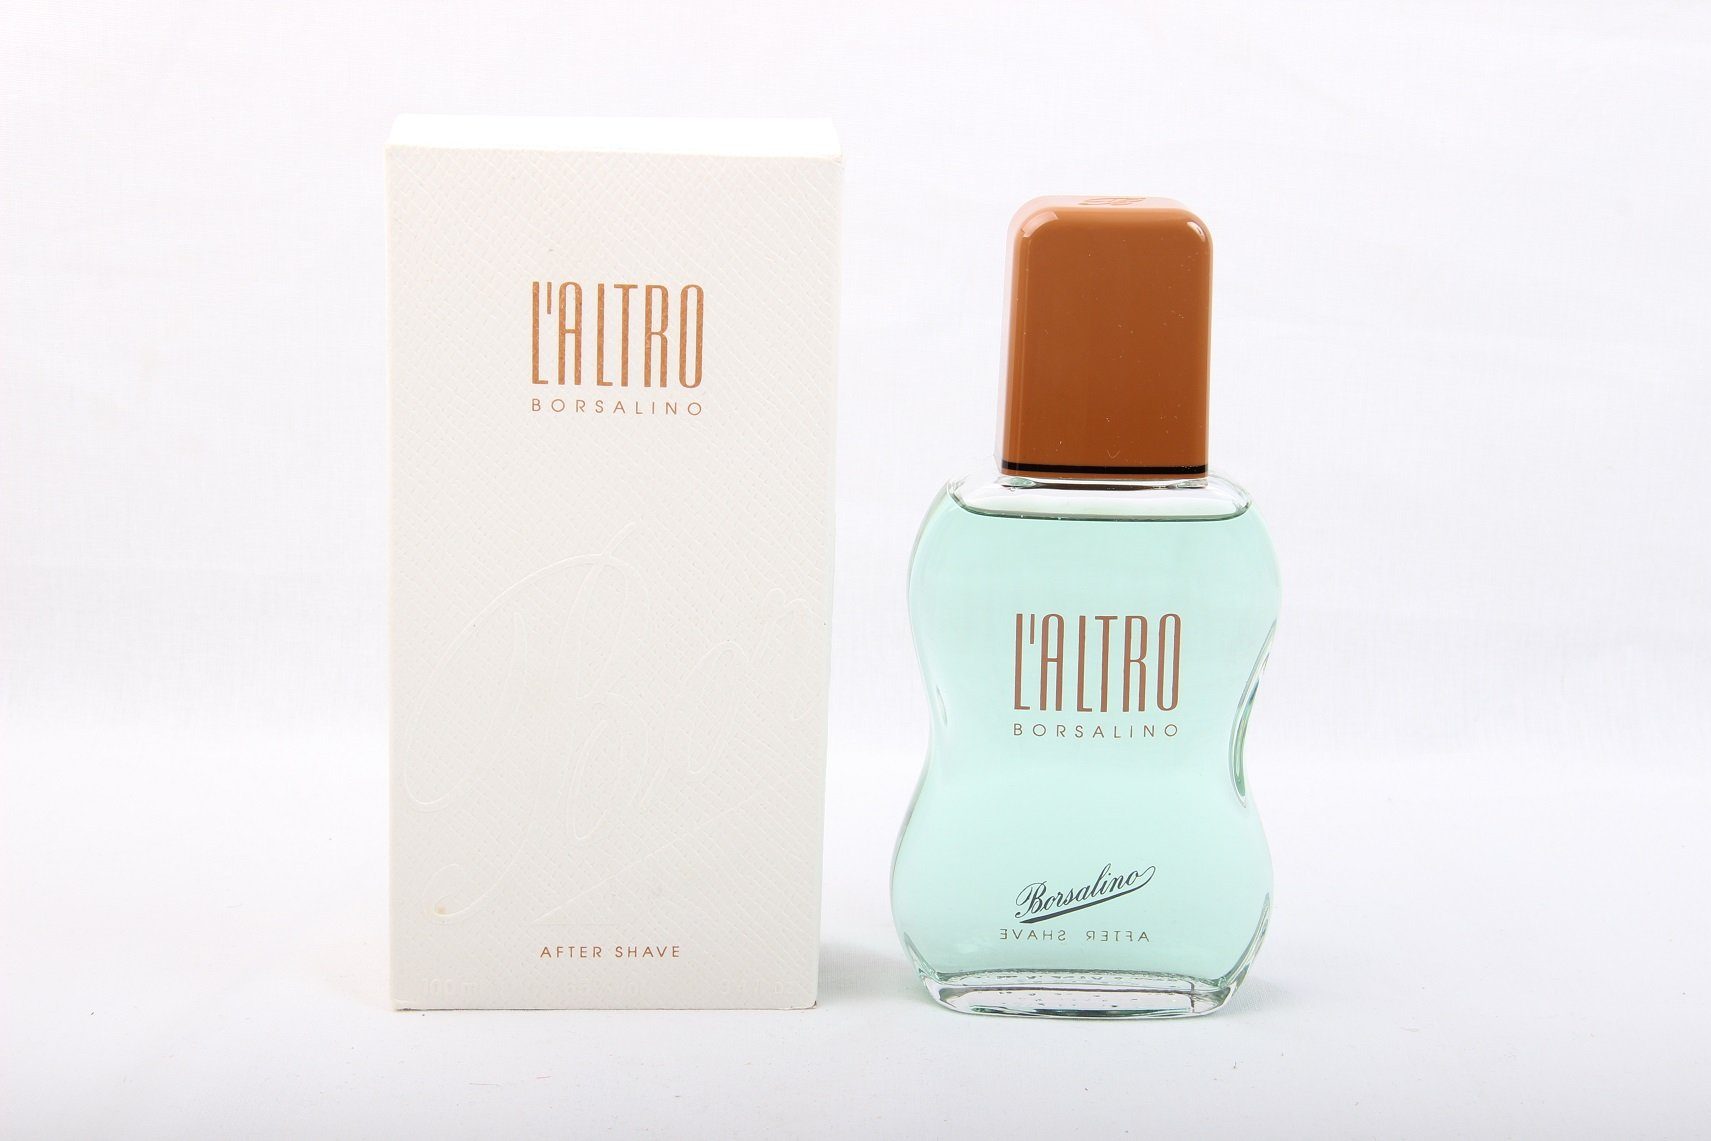 Borsalino After-Shave Borsalino L'Altro After Shave 100ml